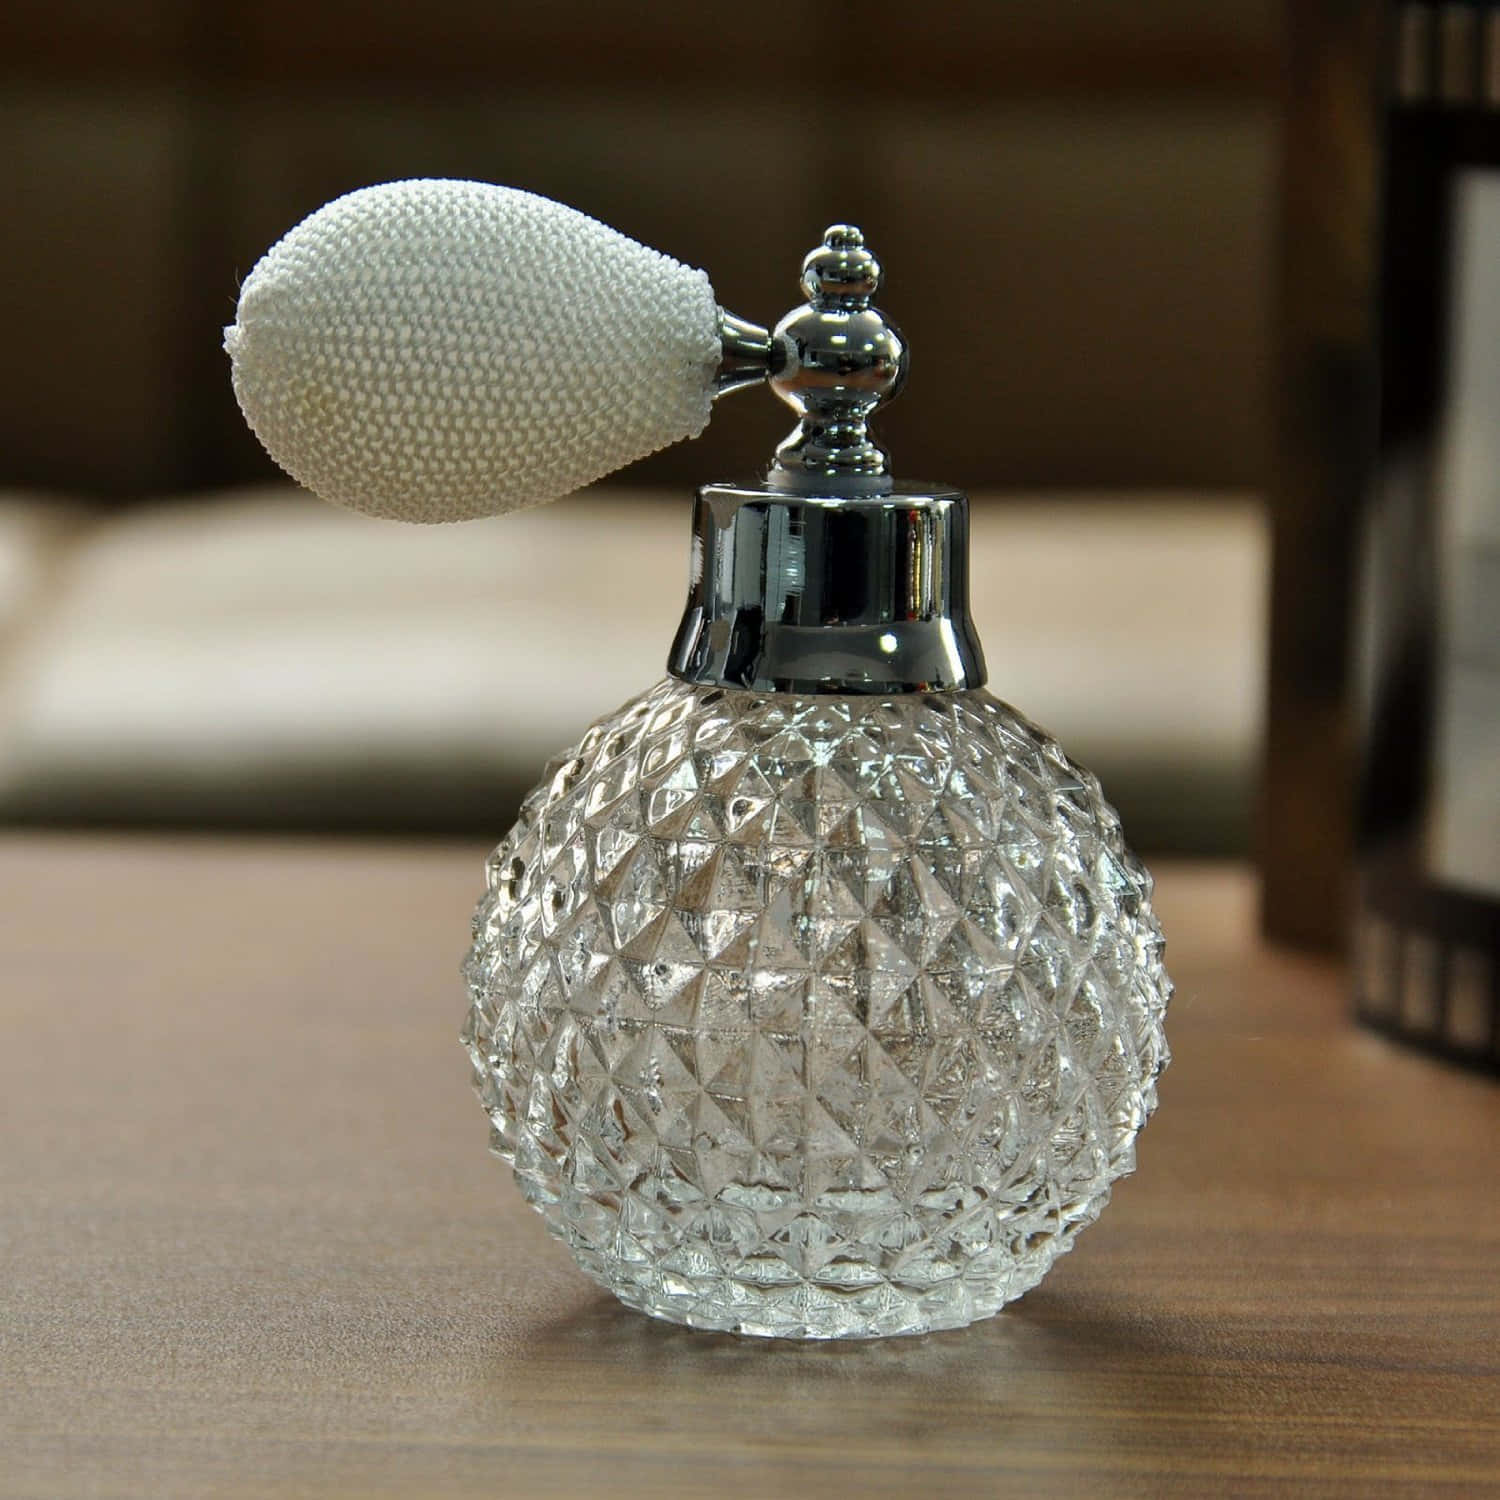 A Glass Perfume Bottle On A Table